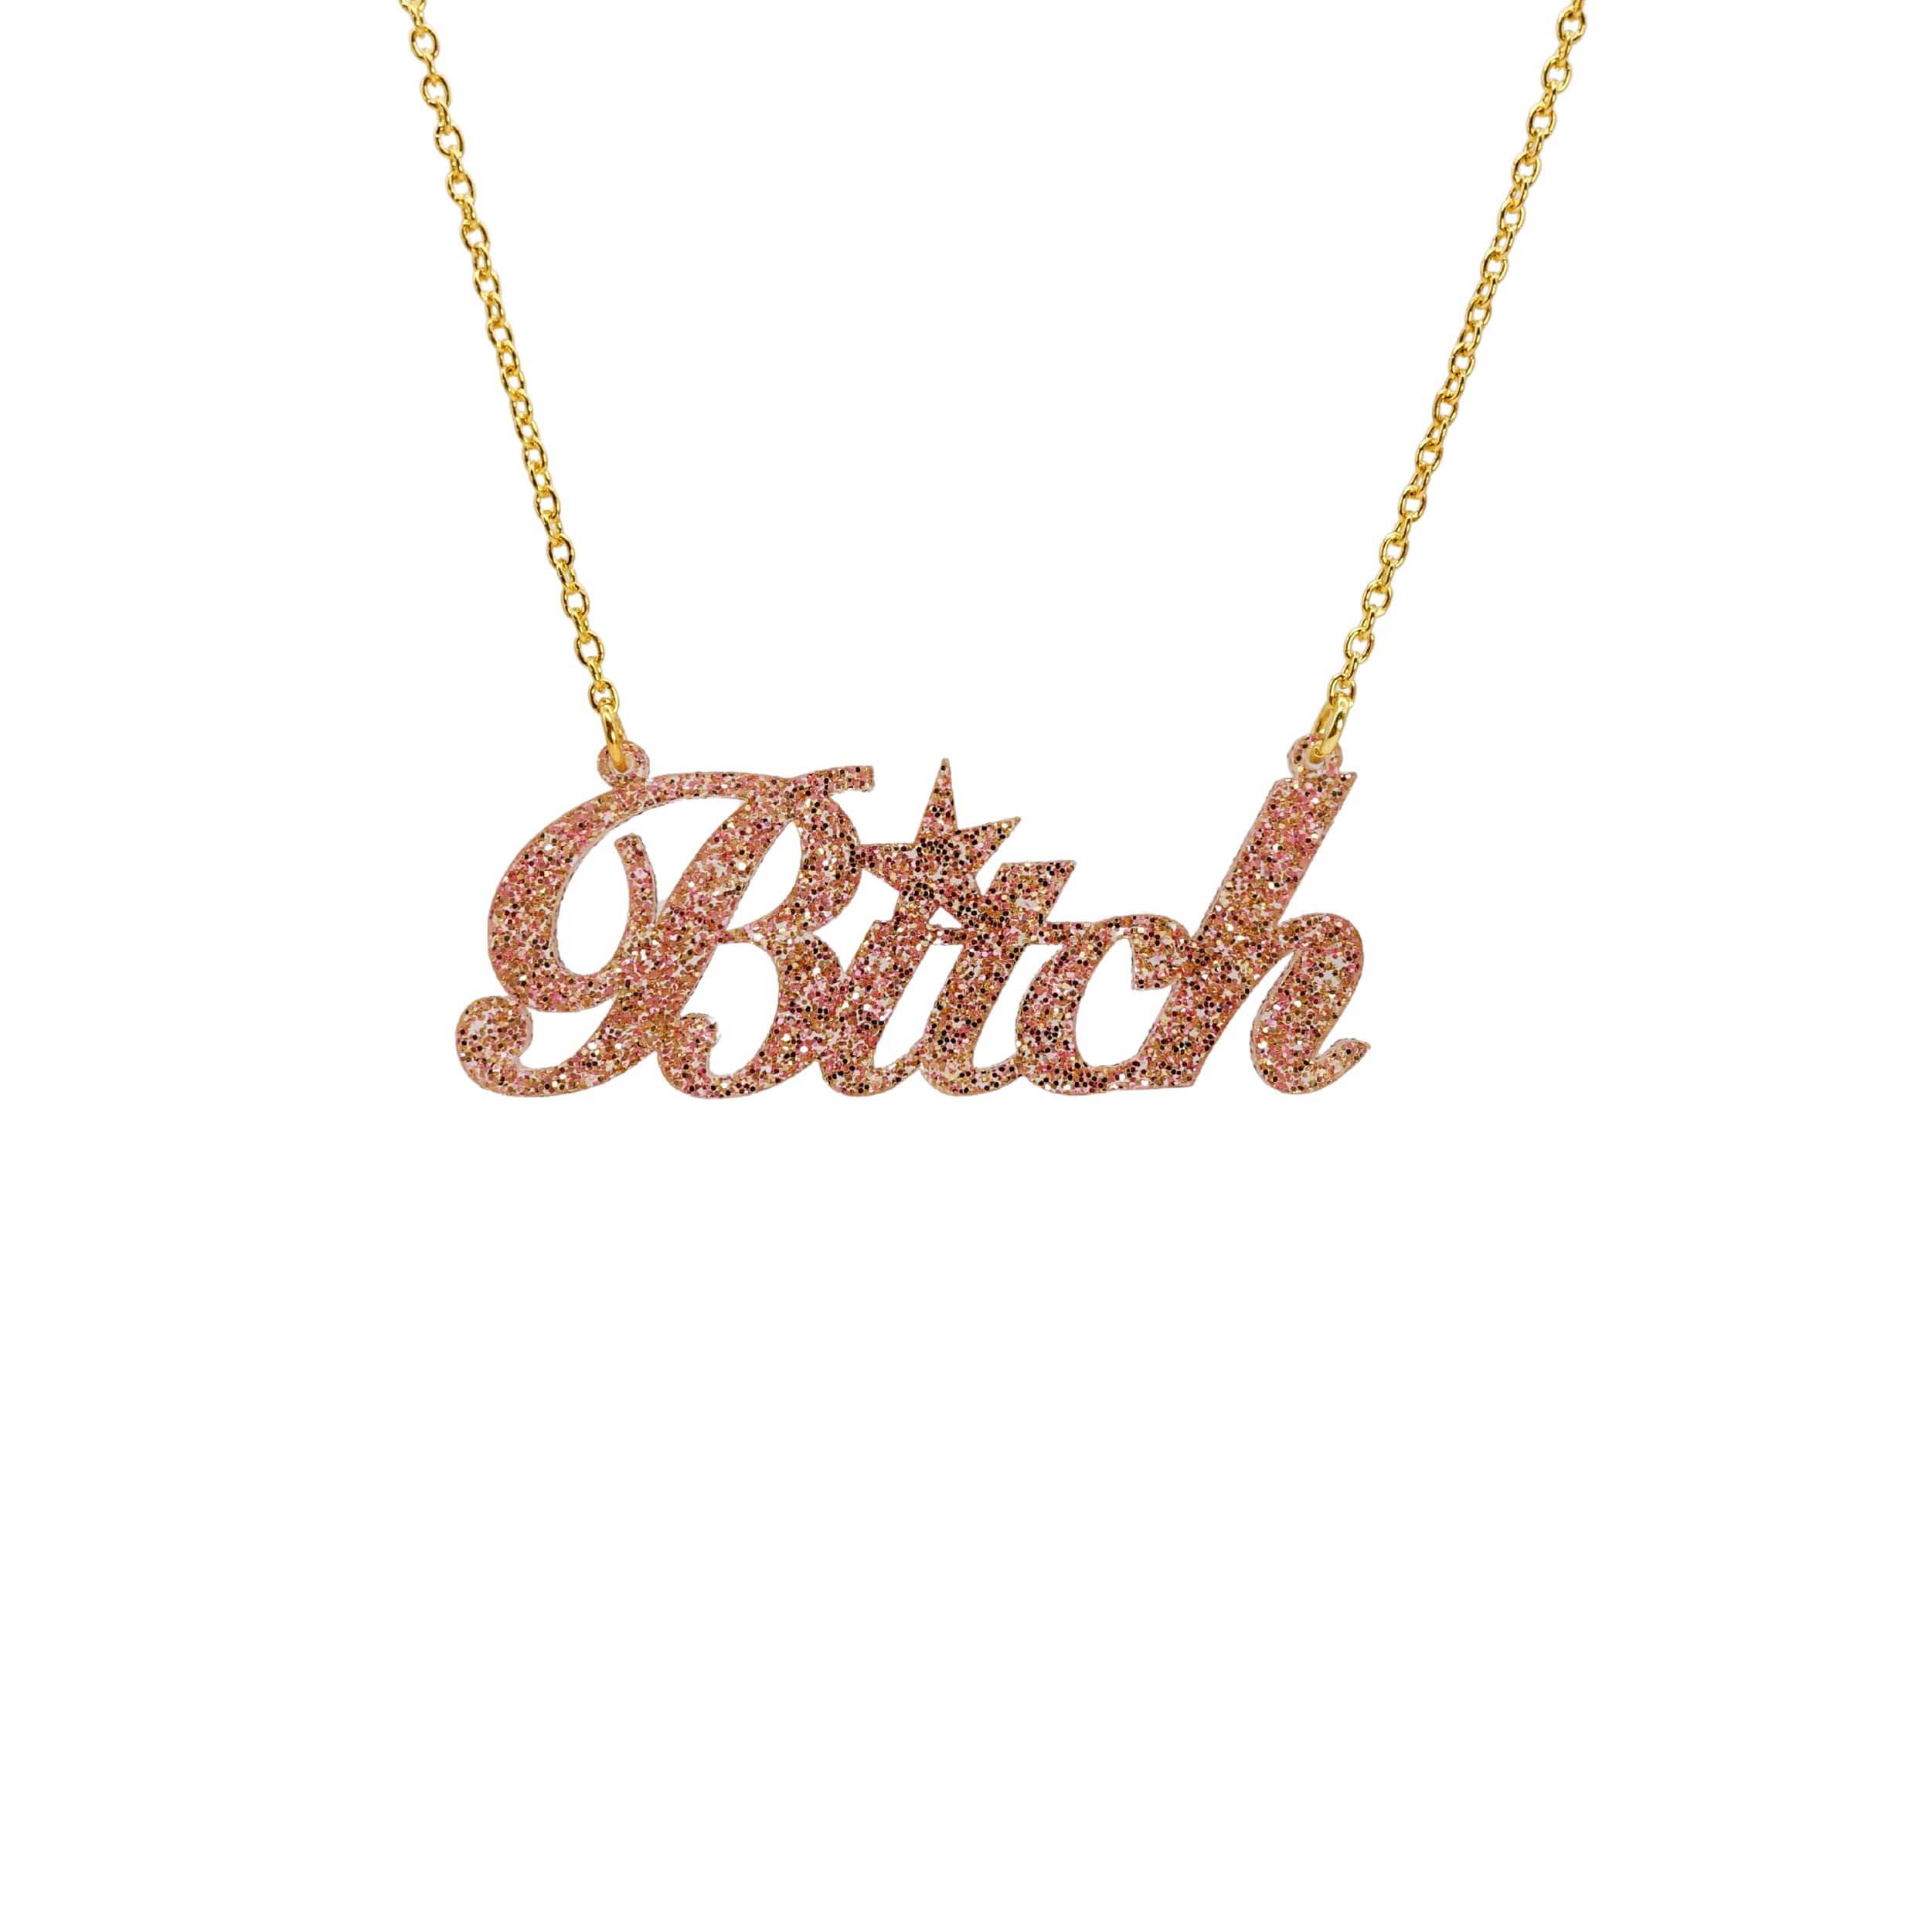 B*tch necklace in pink fizz glitter shown hanging against a white background. £2 goes to Bloody Good Period. 